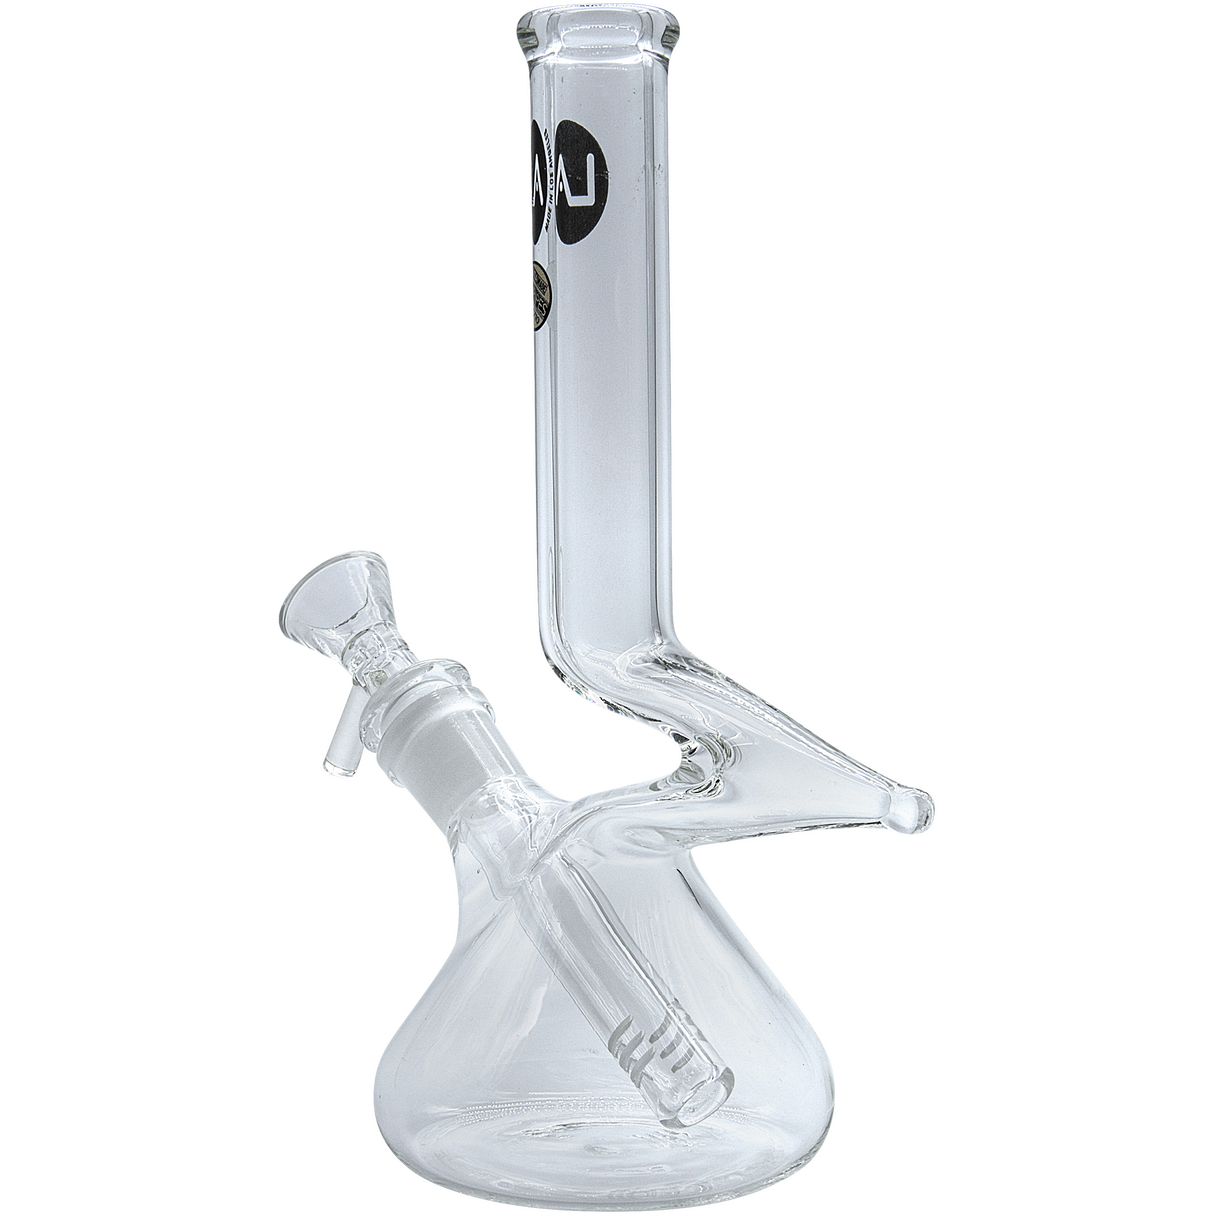 LA Pipes "The Zag" Beaker Zong Style Bong, Clear Borosilicate Glass, Side View